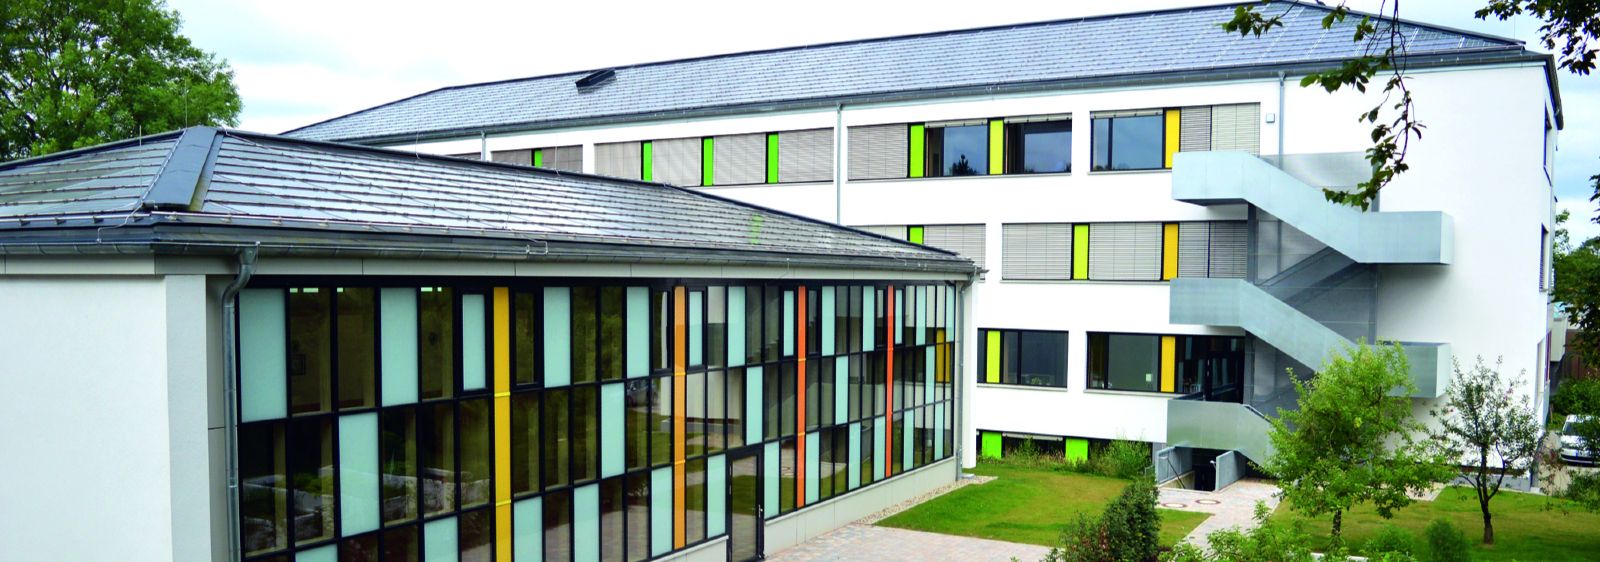 Three buildings and a gymnasium of the vocational college campus in Detmold were fundamentally renovated.